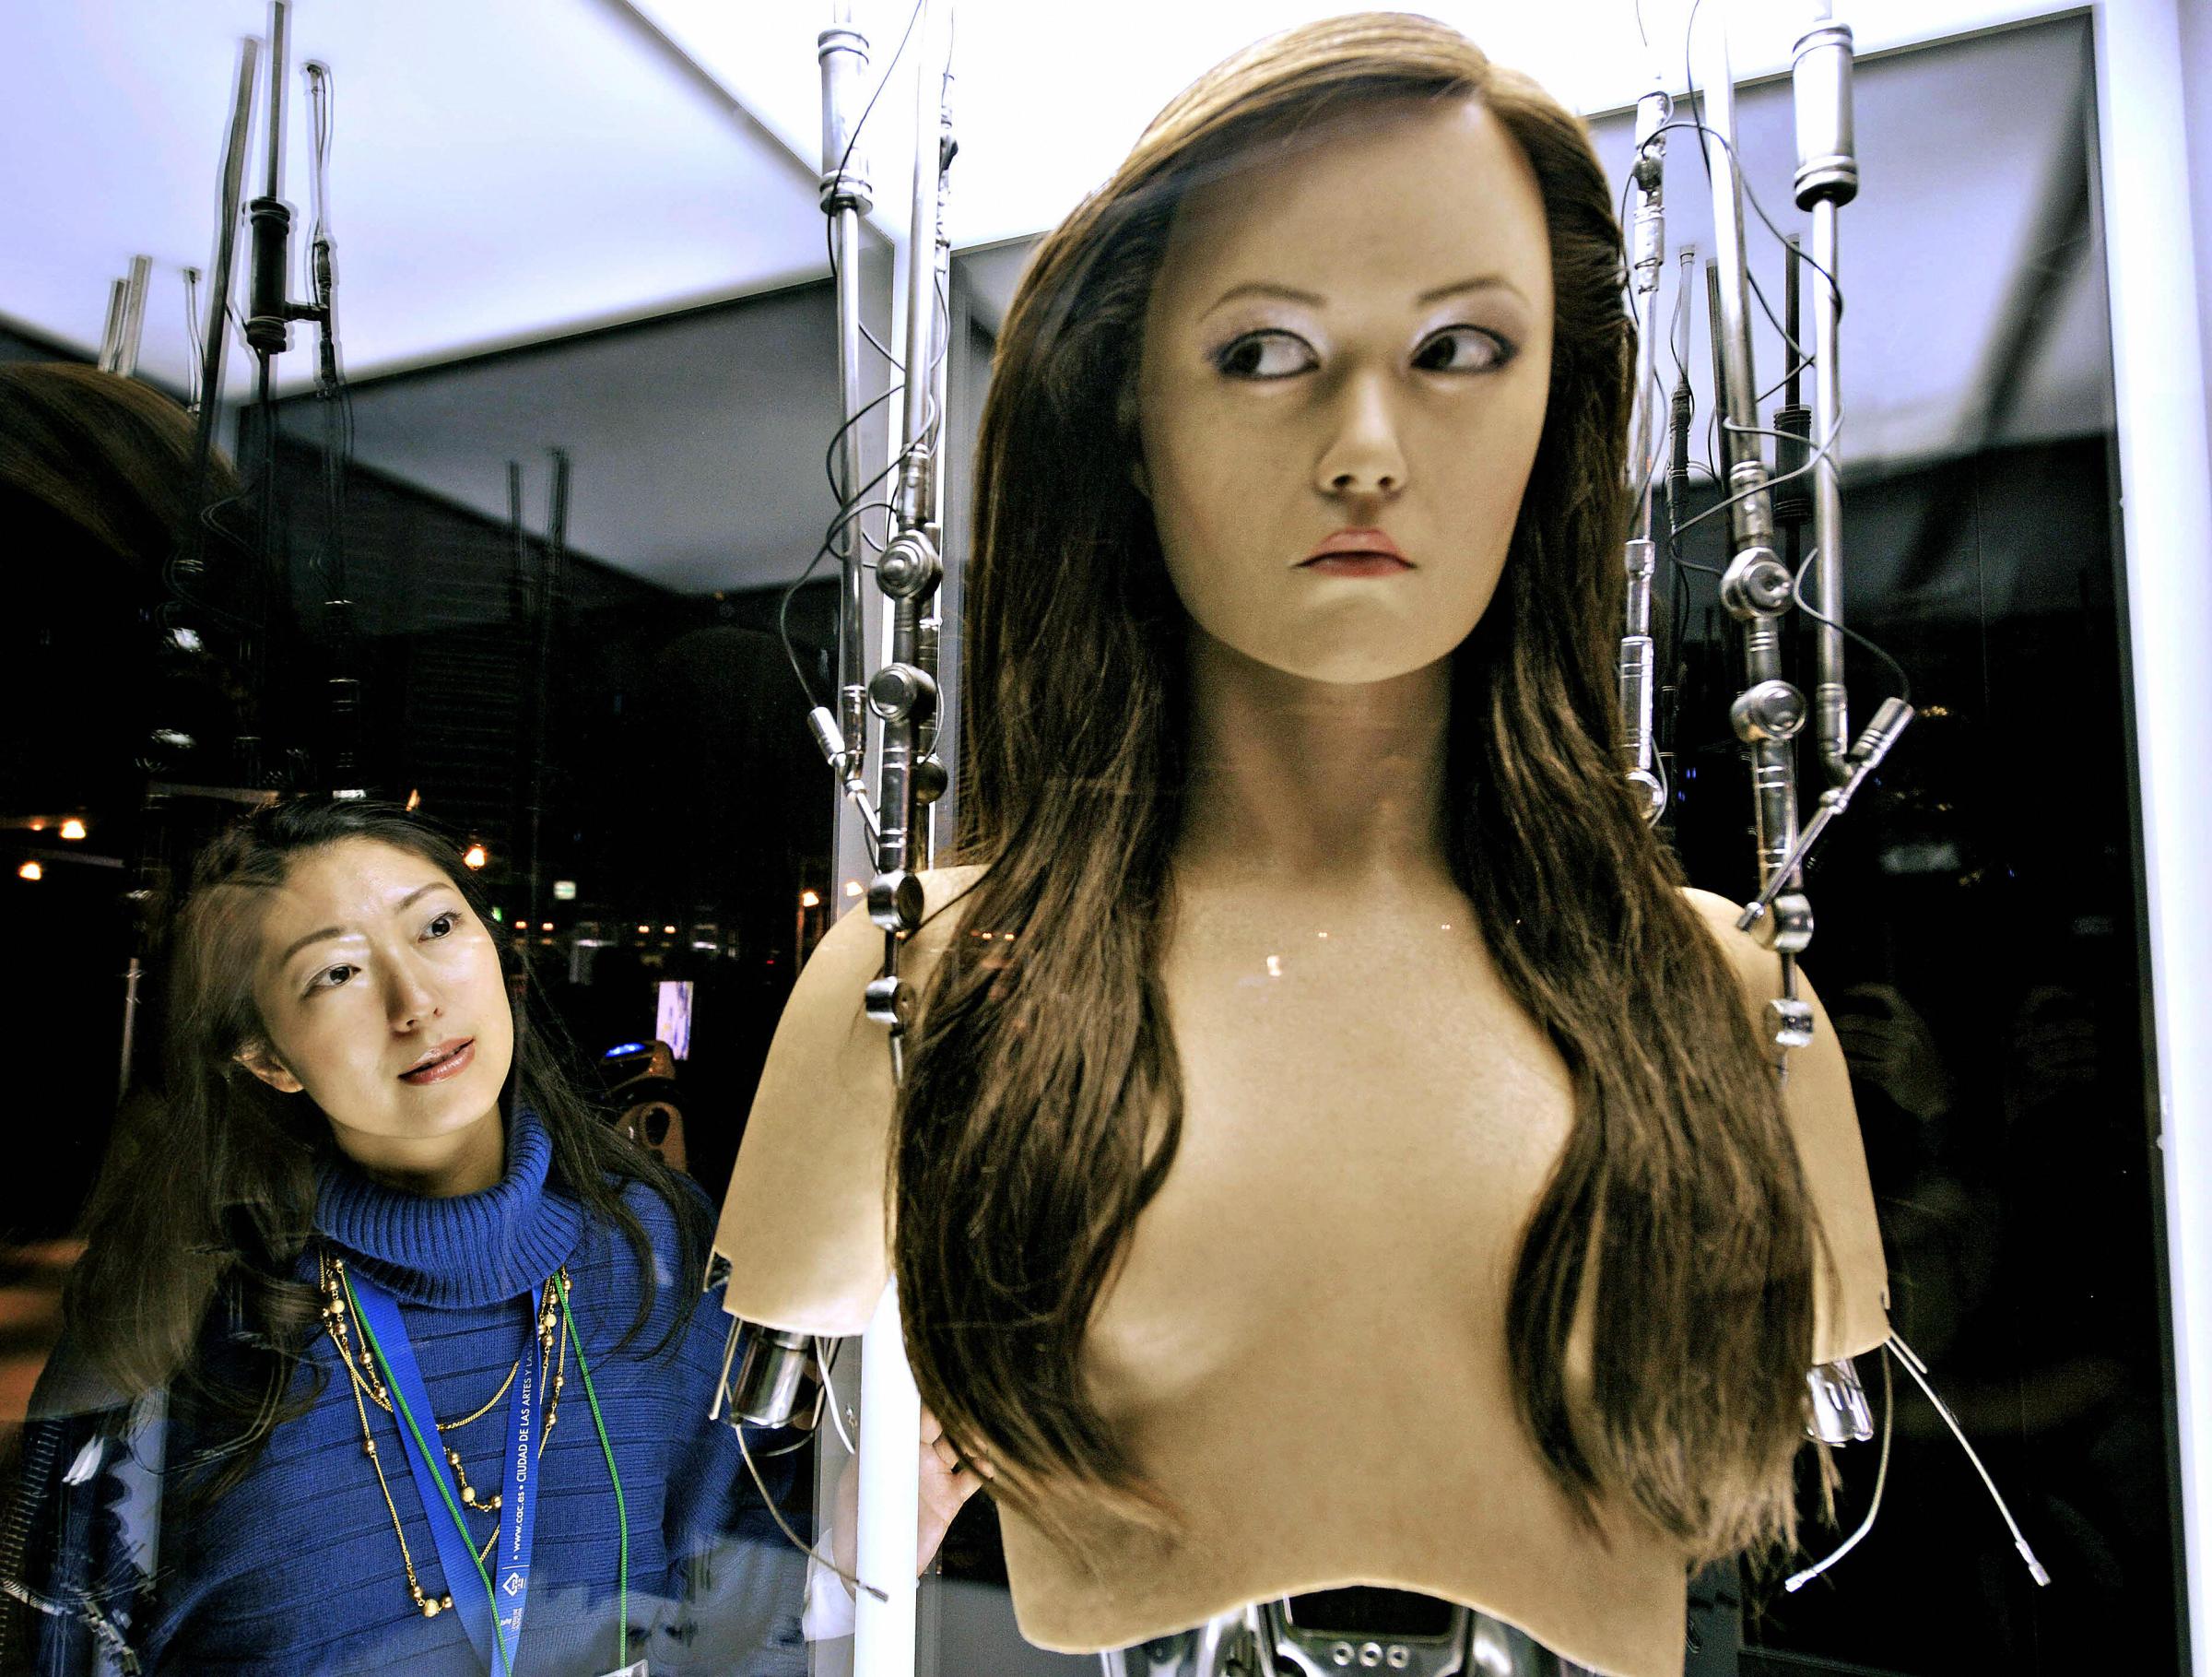 A woman watches a full-scale figure of a terminator robot "Cameron Phillipes" at a preview of the Terminator Exhibition in Tokyo on March 18, 2009.